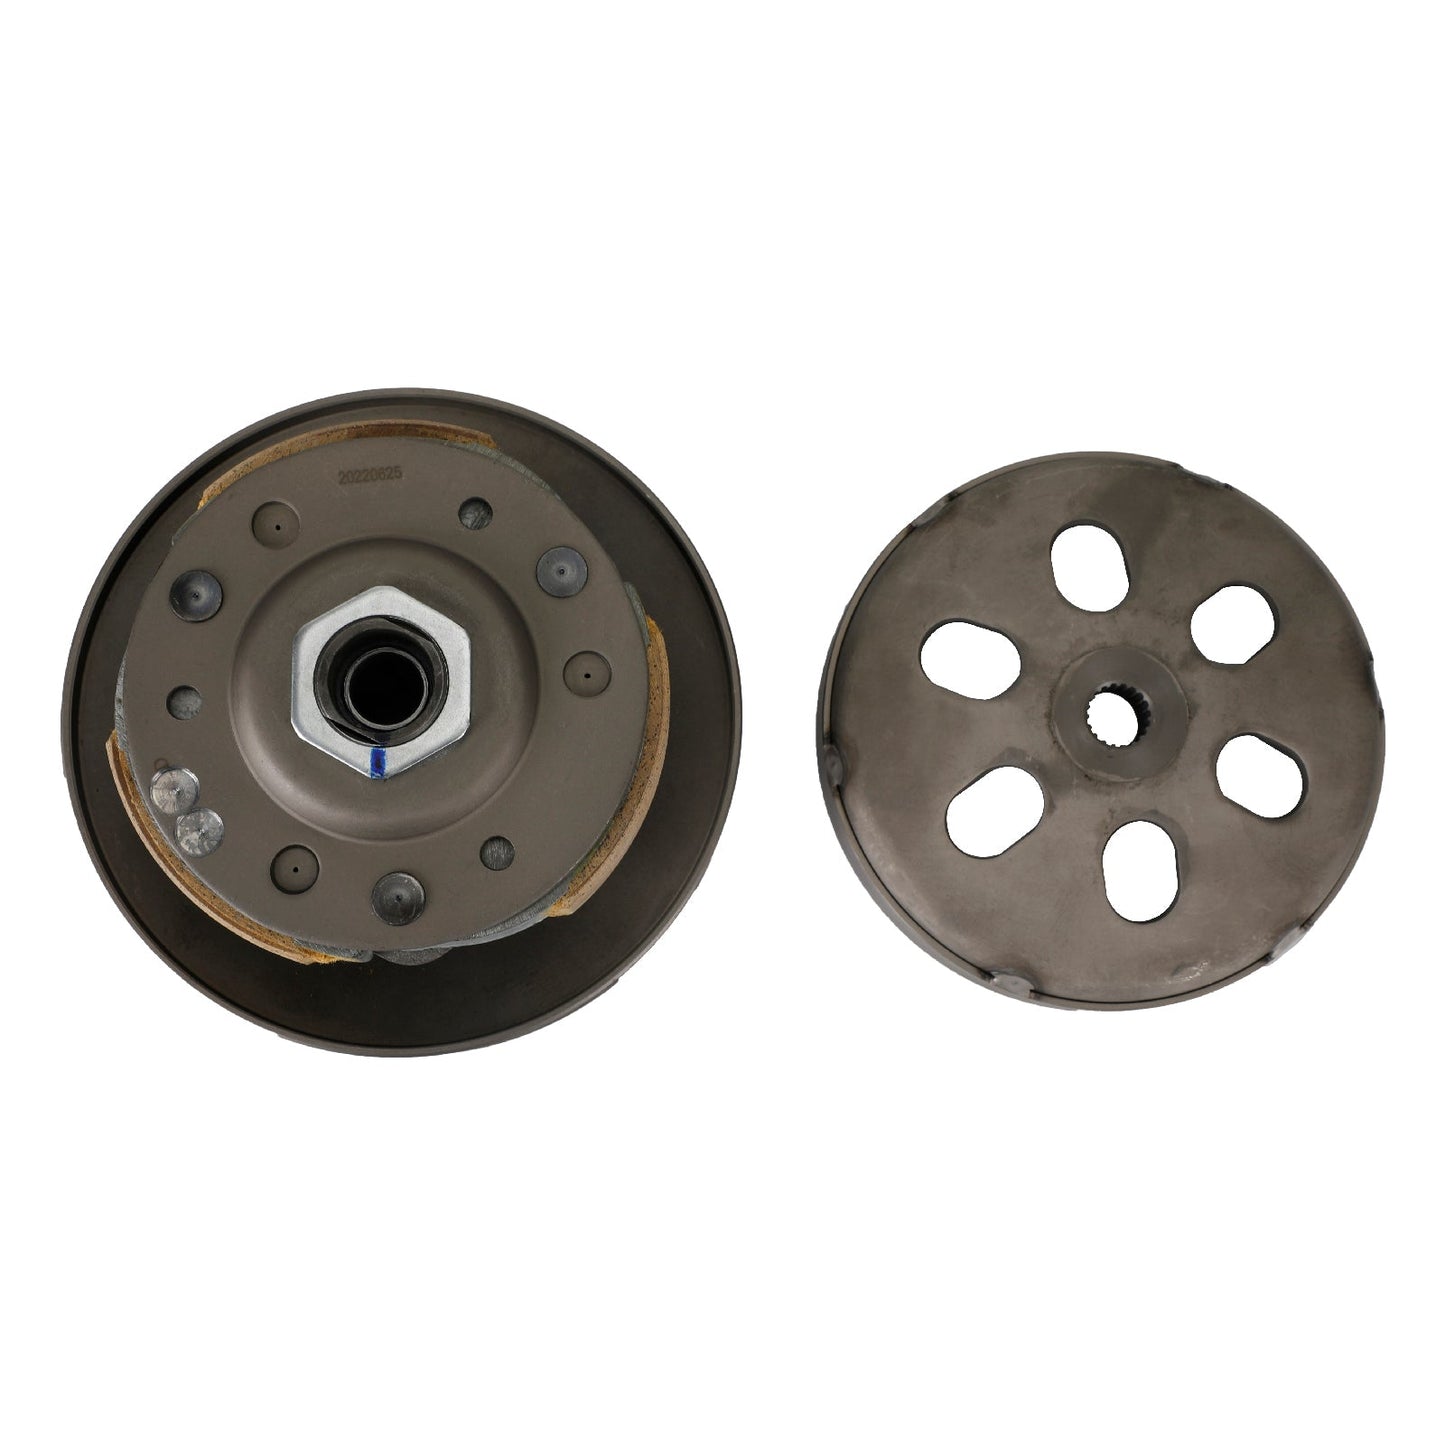 Clutch Variator Pulley Set For Yamaha Gpd125/150 Nmax150/155 Xmax125 Yp125Ra Fedex Express